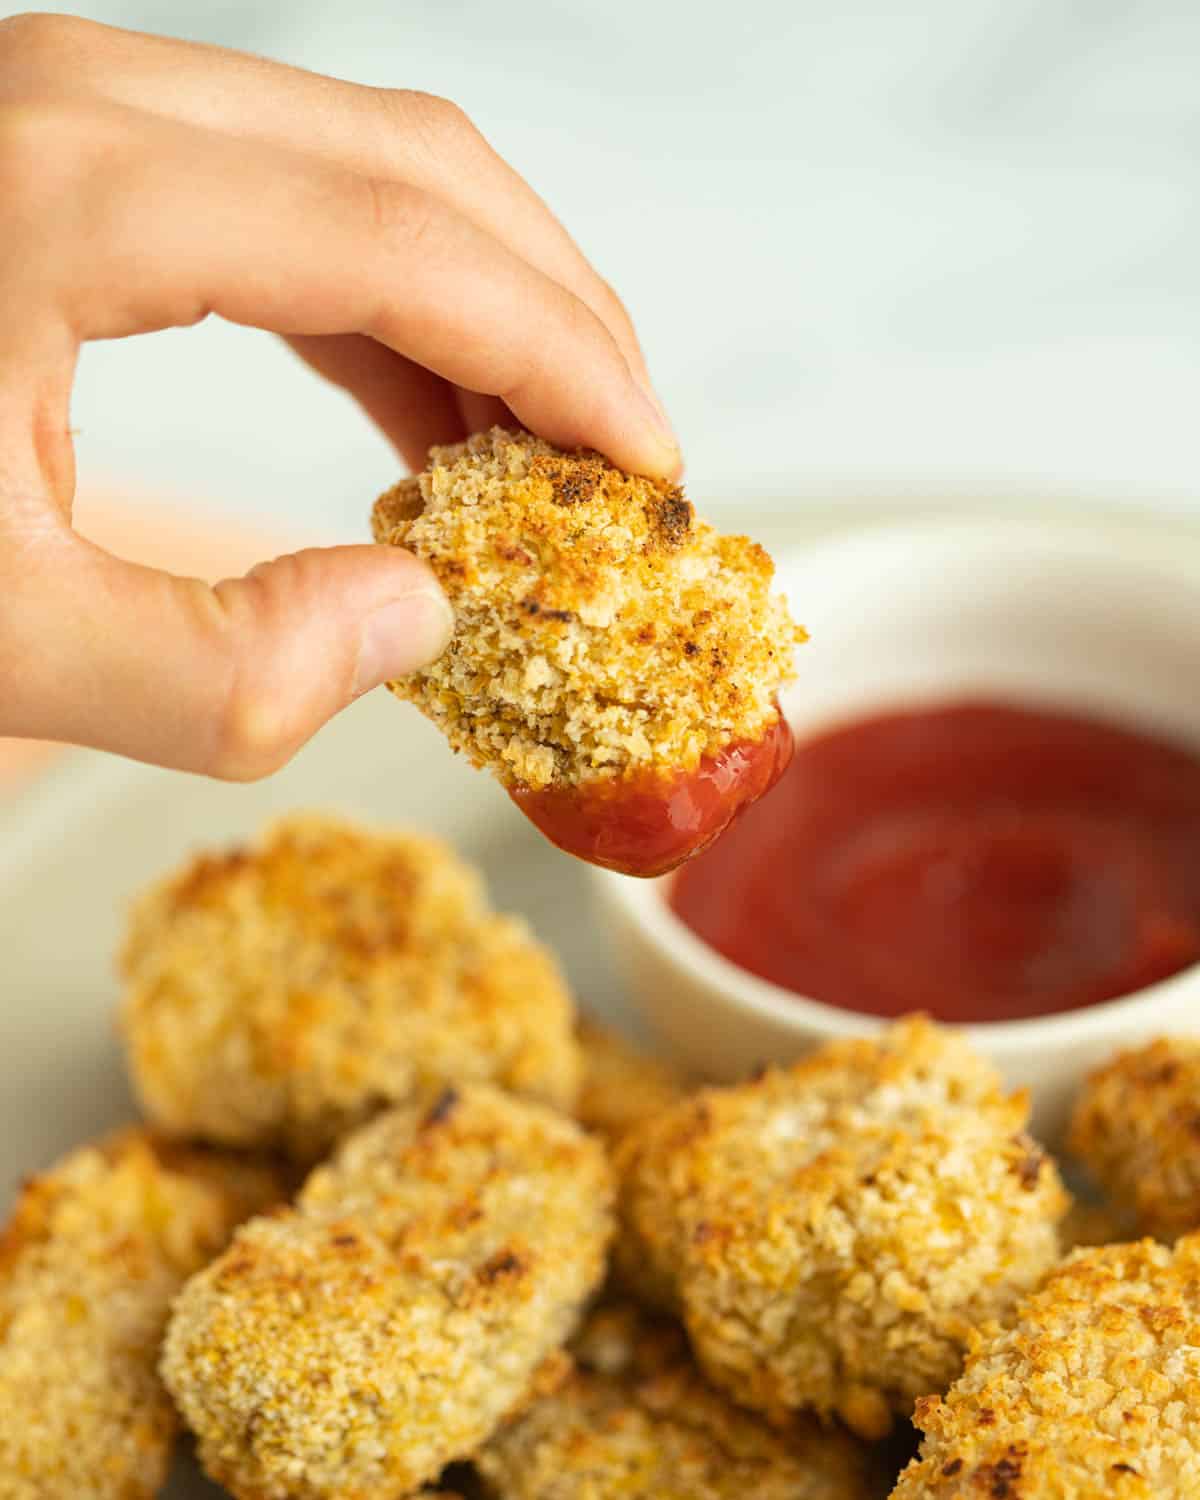 Hand dipping tofu chicken nuggets in ketchup.
